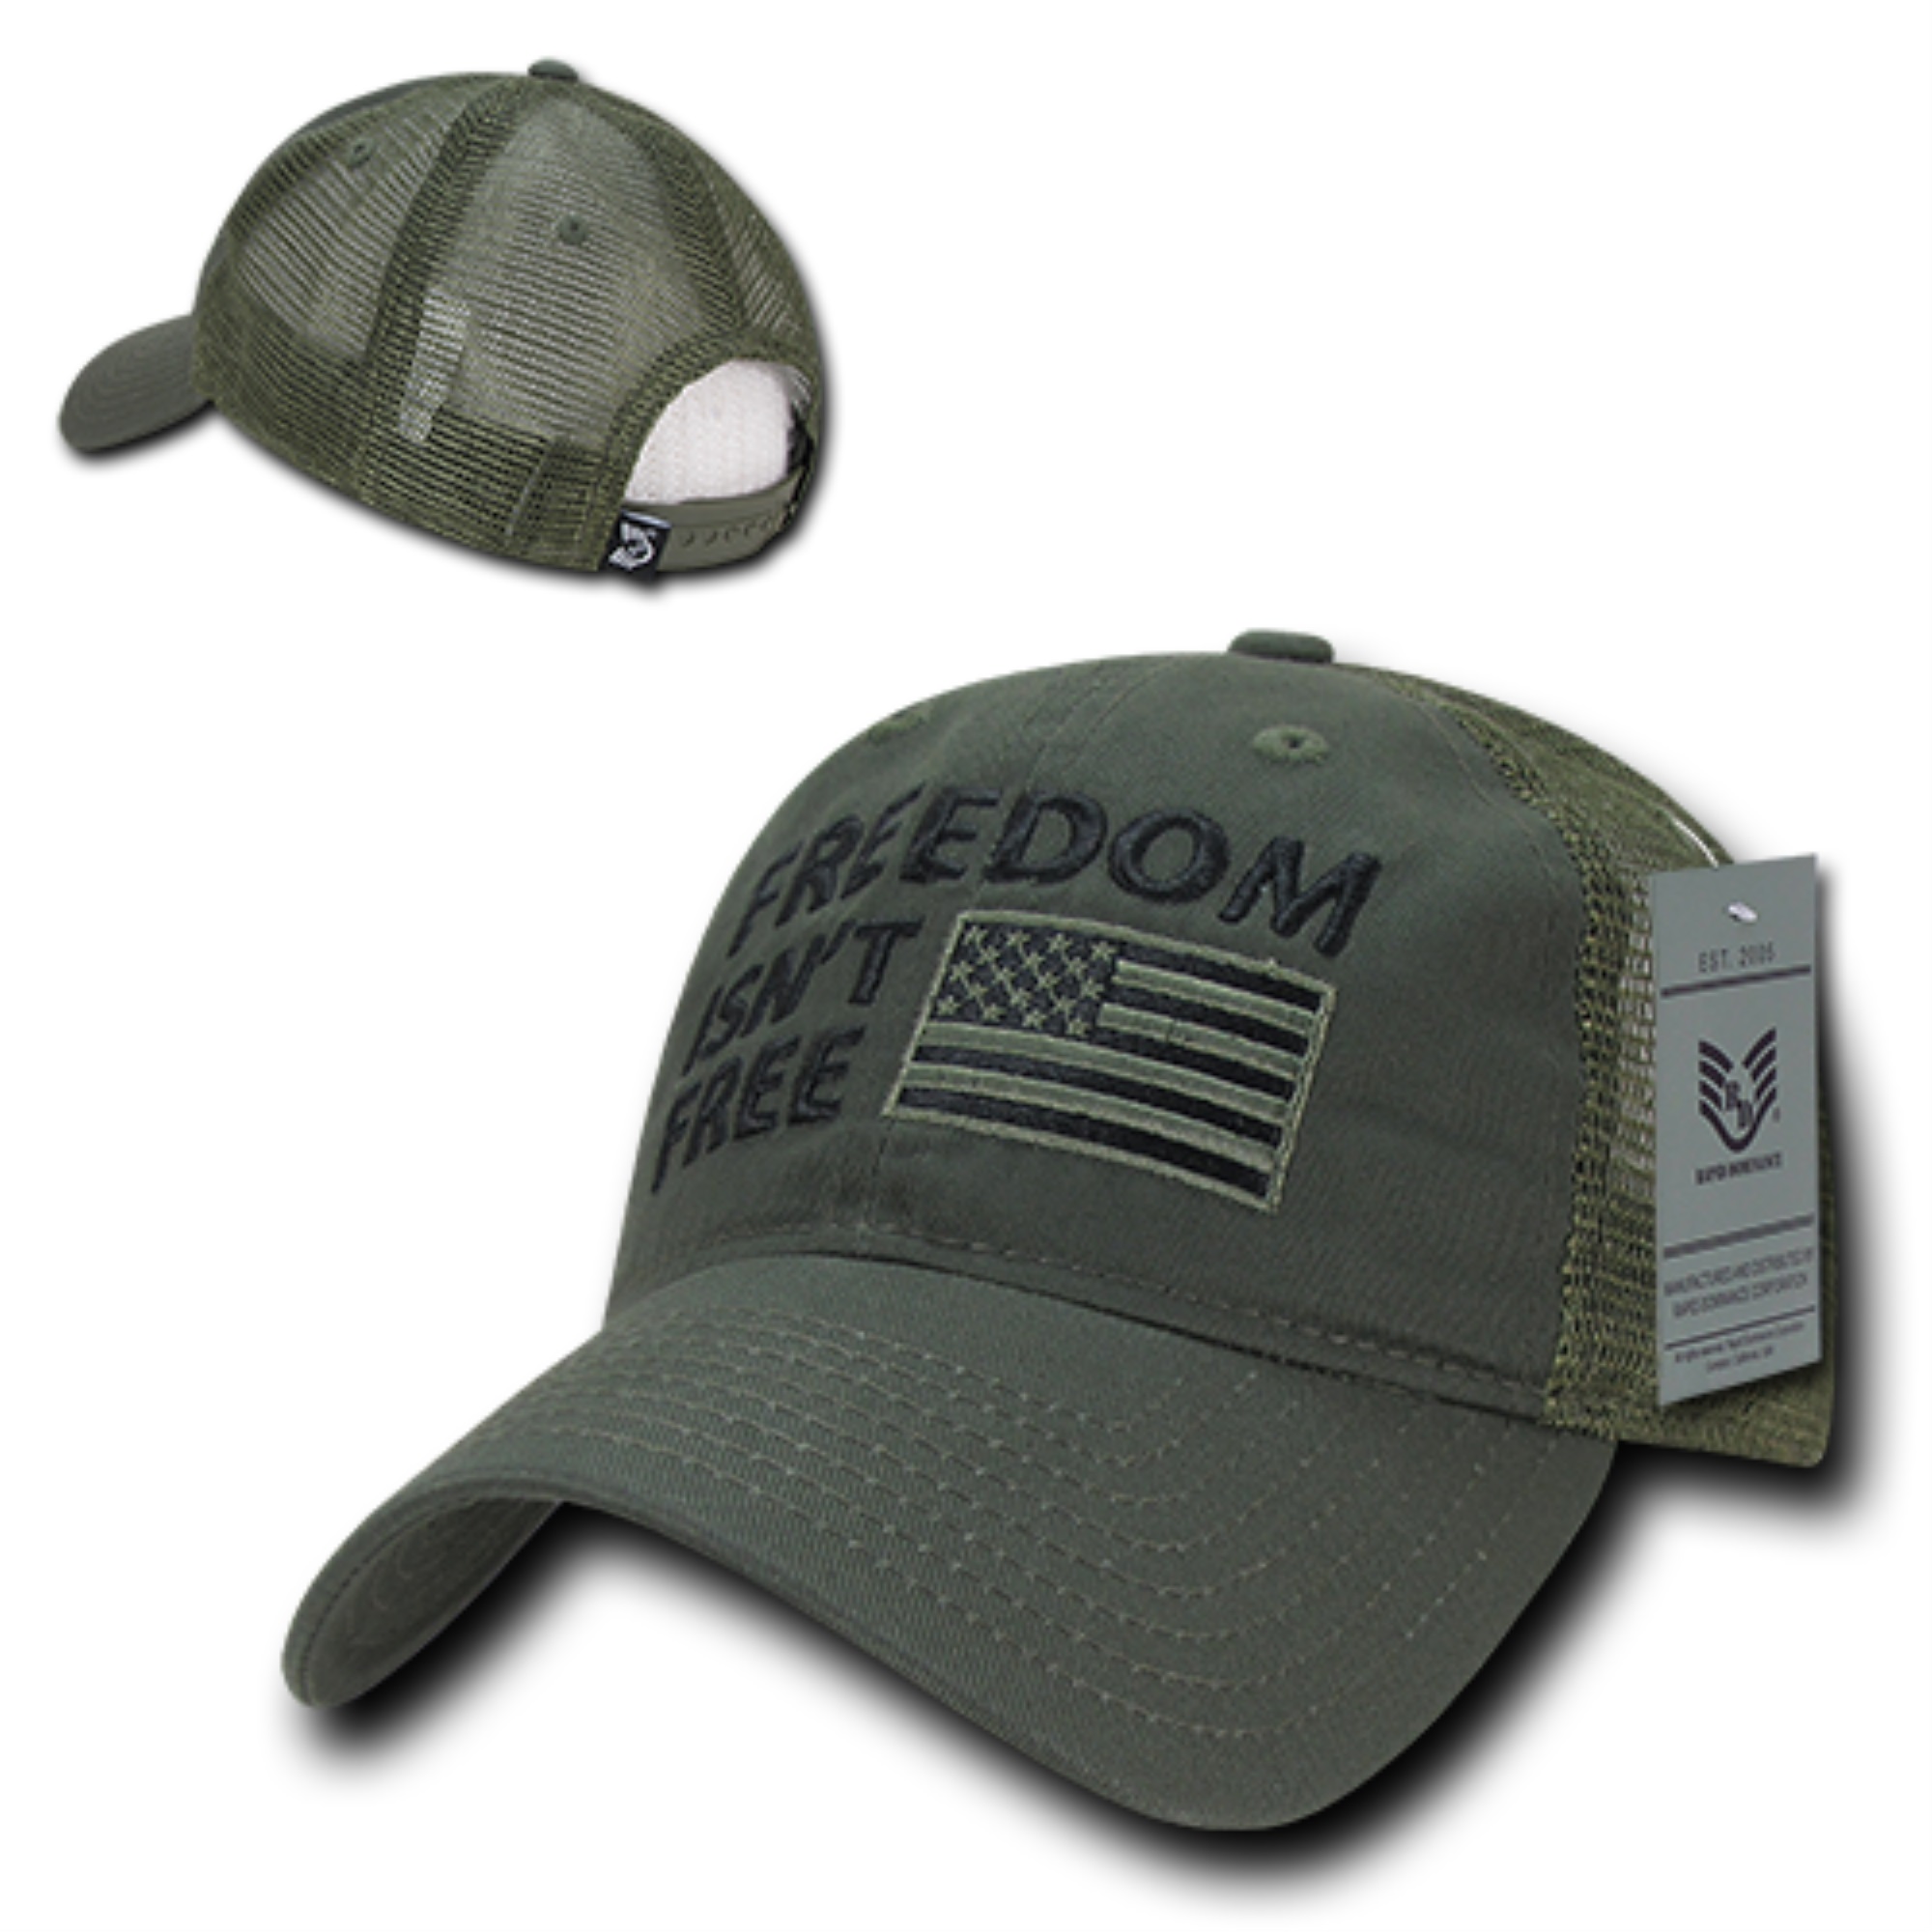 Rapid Dominance A05-FIF-OLV Freedom Relaxed Trucker USA Cap, Olive - image 2 of 3